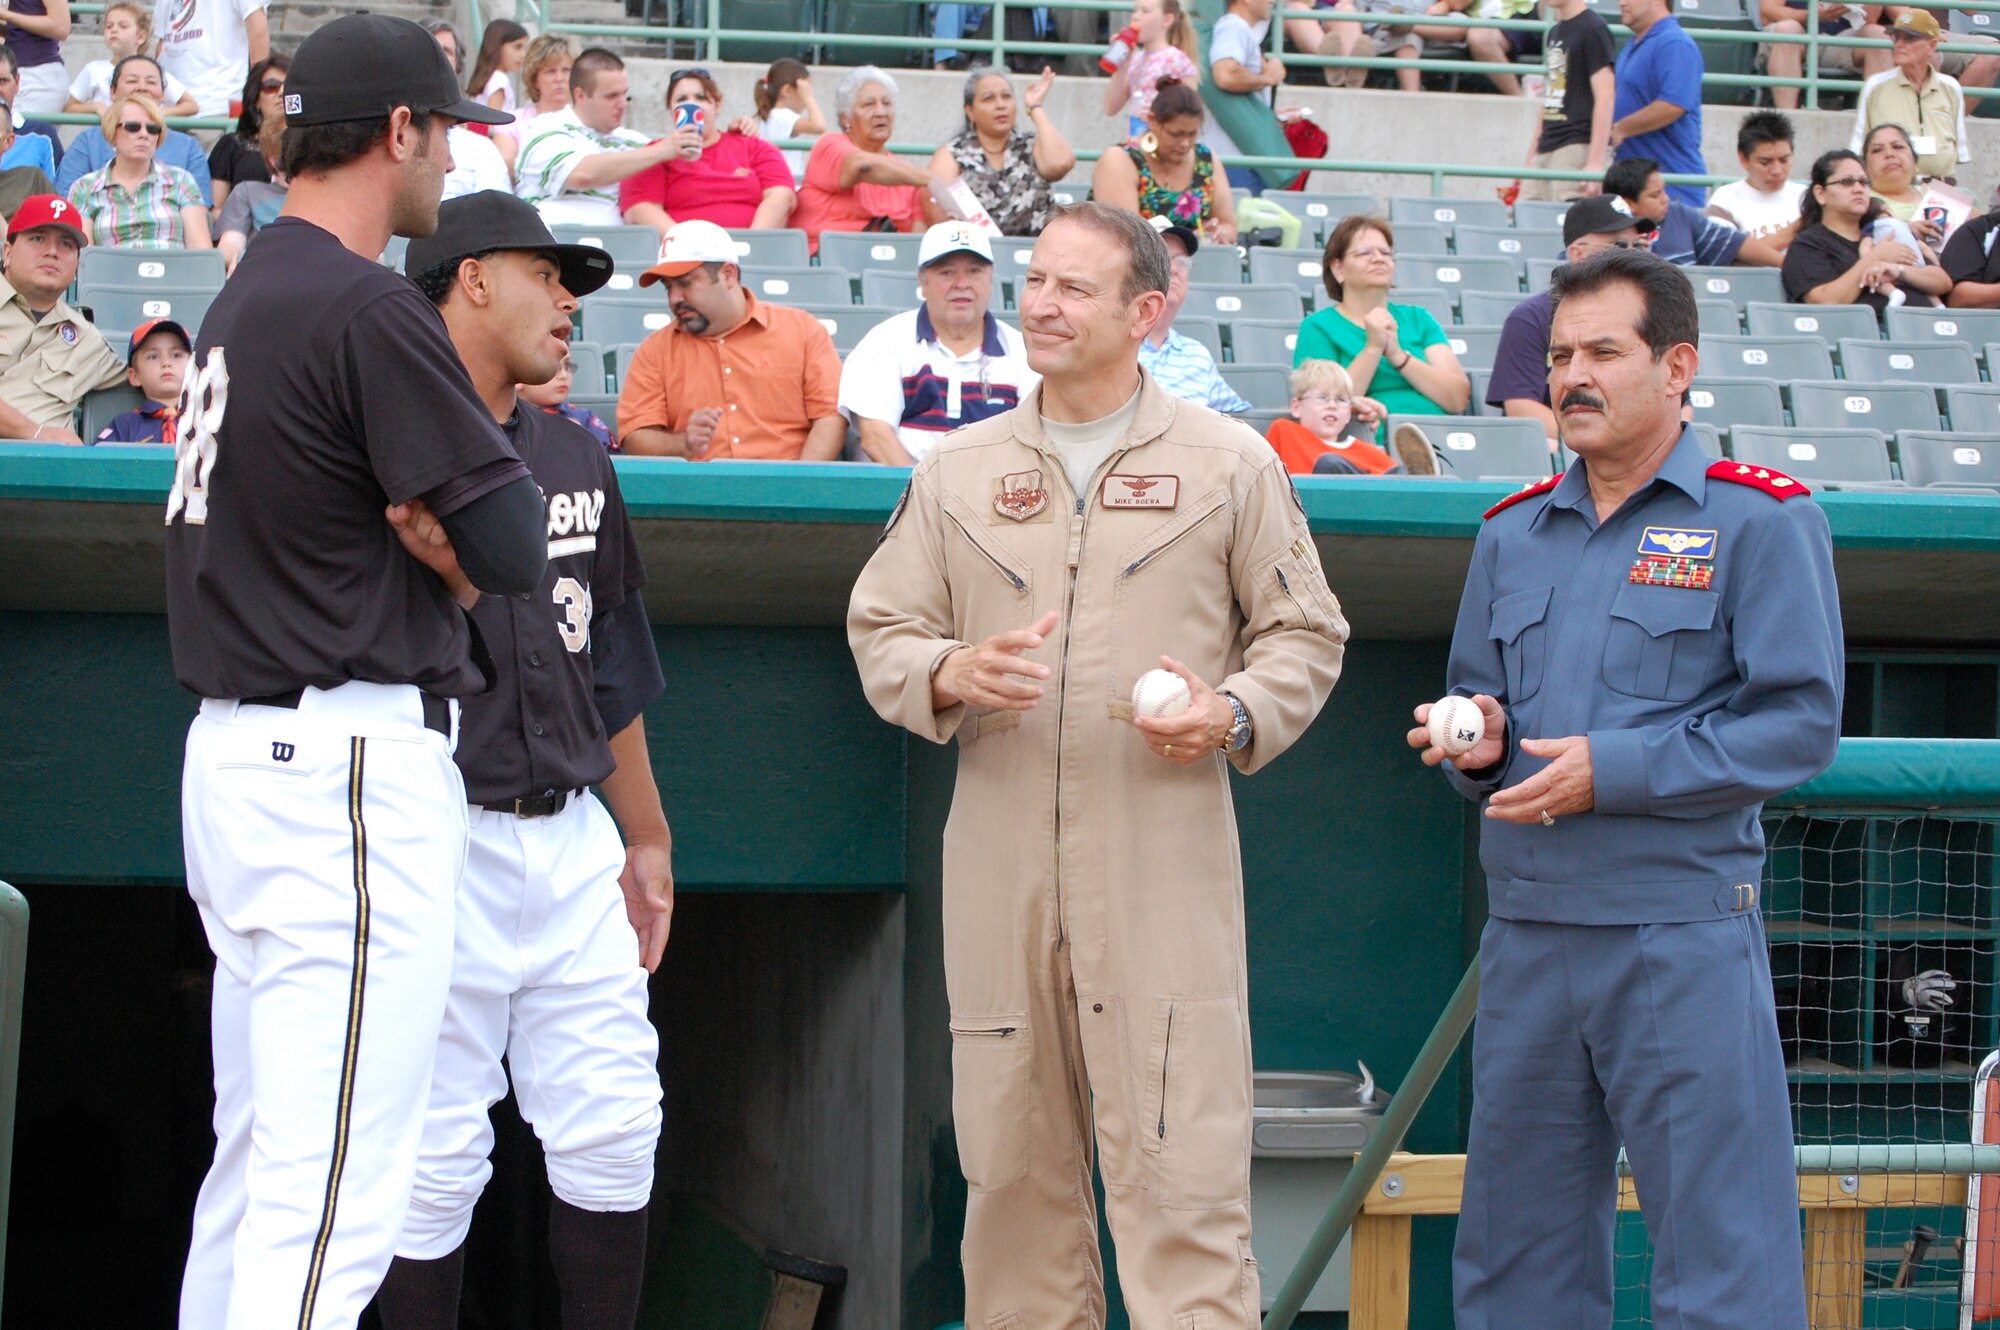 Brig. Gen. Michael Boera, Coalition Air Power Transition Force commanding general, center, and Maj. Gen. Mohammad Dawran, Afghan National army air corps, right, talk to players from the San Antonio Missions Baseball team May 23 before throwing out a dual-first pitch of the game at Wolf Stadium in San Antonio, Texas. General Dawran is visiting Air Education and Training Command to receive updated information on current and future security assistance and cooperation training for the ANAAC. General Boera is working to stand up a robust ANAAC center of excellence and he is exploring more in-depth maintenance training between the two nations. Since the establishment of the Kabul Air Corps Training Center in 2007, in Afghanistan, more than 1,100 Afghani military members have received training in air corps orientation, air traffic control, fire fighting, aircraft maintenance, loadmaster duties and gunner training. (U.S. Air Force photo/Master Sgt. Paul Kilgallon)